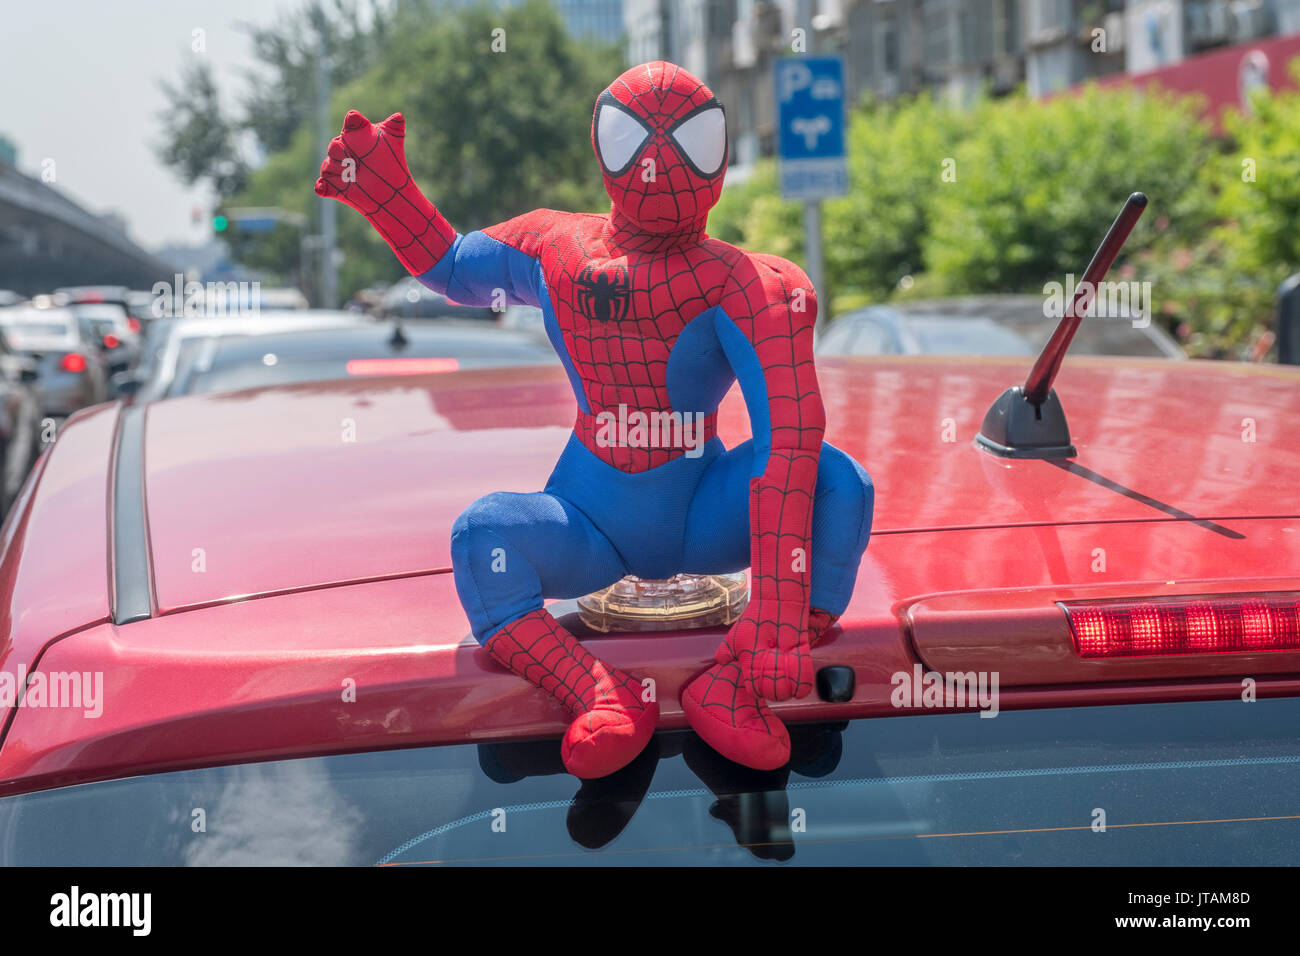 Spider-Man toy is seen on a private car in Beijing, China. 08-Aug-2017 Stock Photo